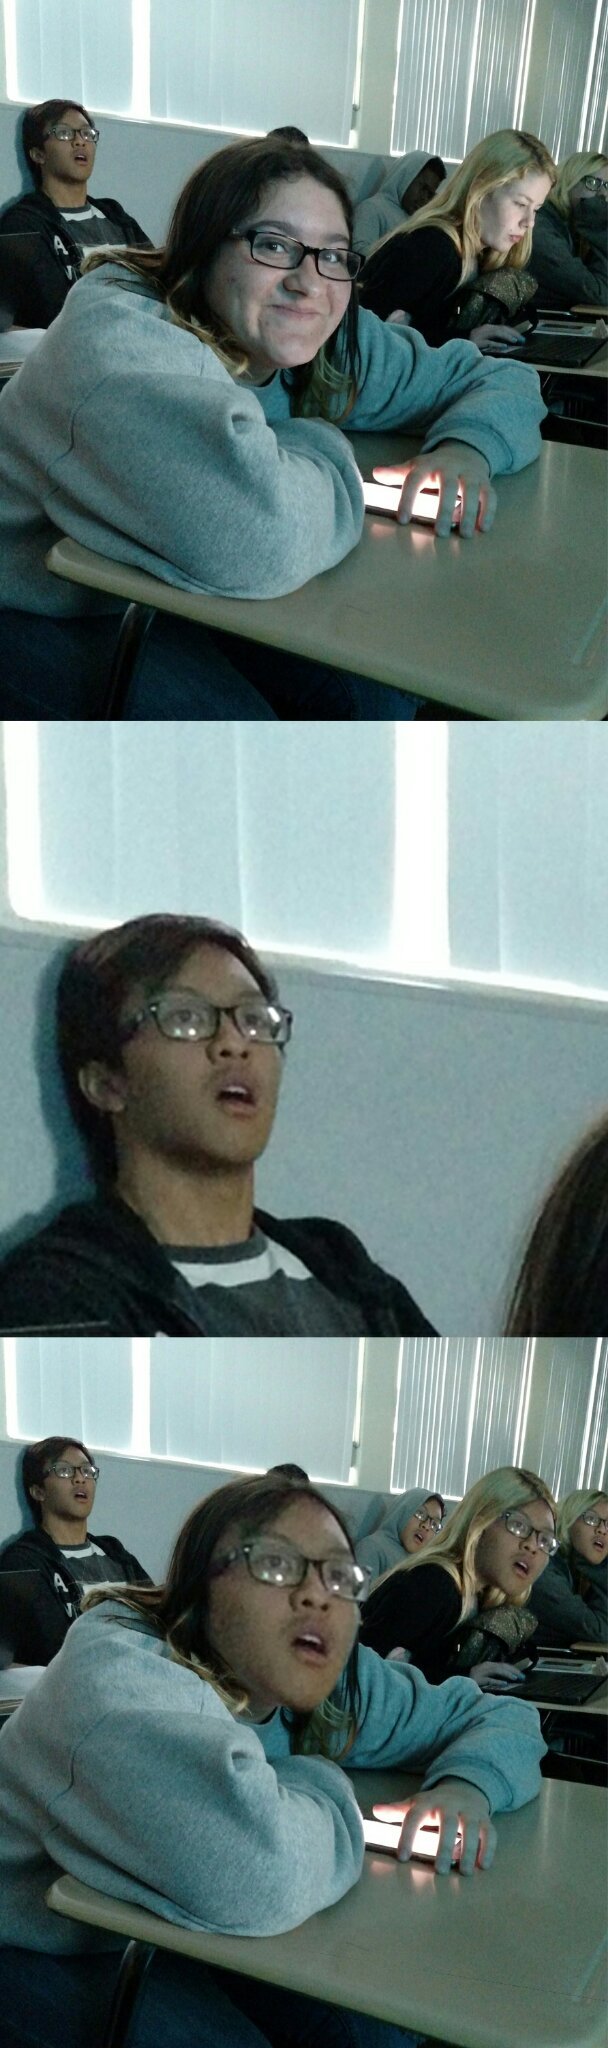 tfw ur in class and have no idea whats happening - meme